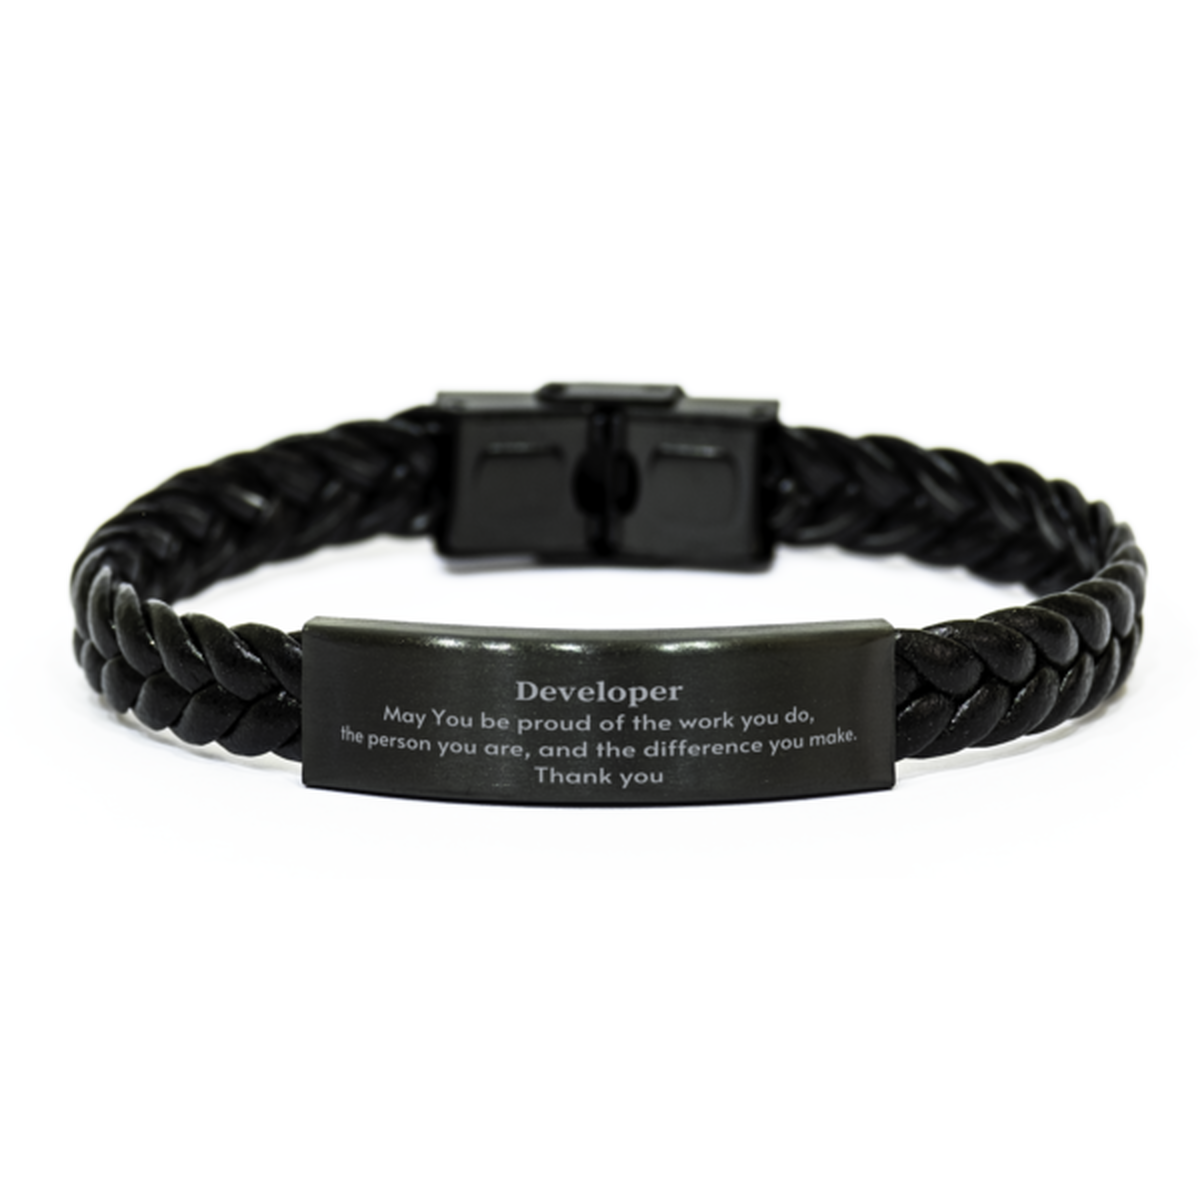 Heartwarming Braided Leather Bracelet Retirement Coworkers Gifts for Developer, Developer May You be proud of the work you do, the person you are Gifts for Boss Men Women Friends